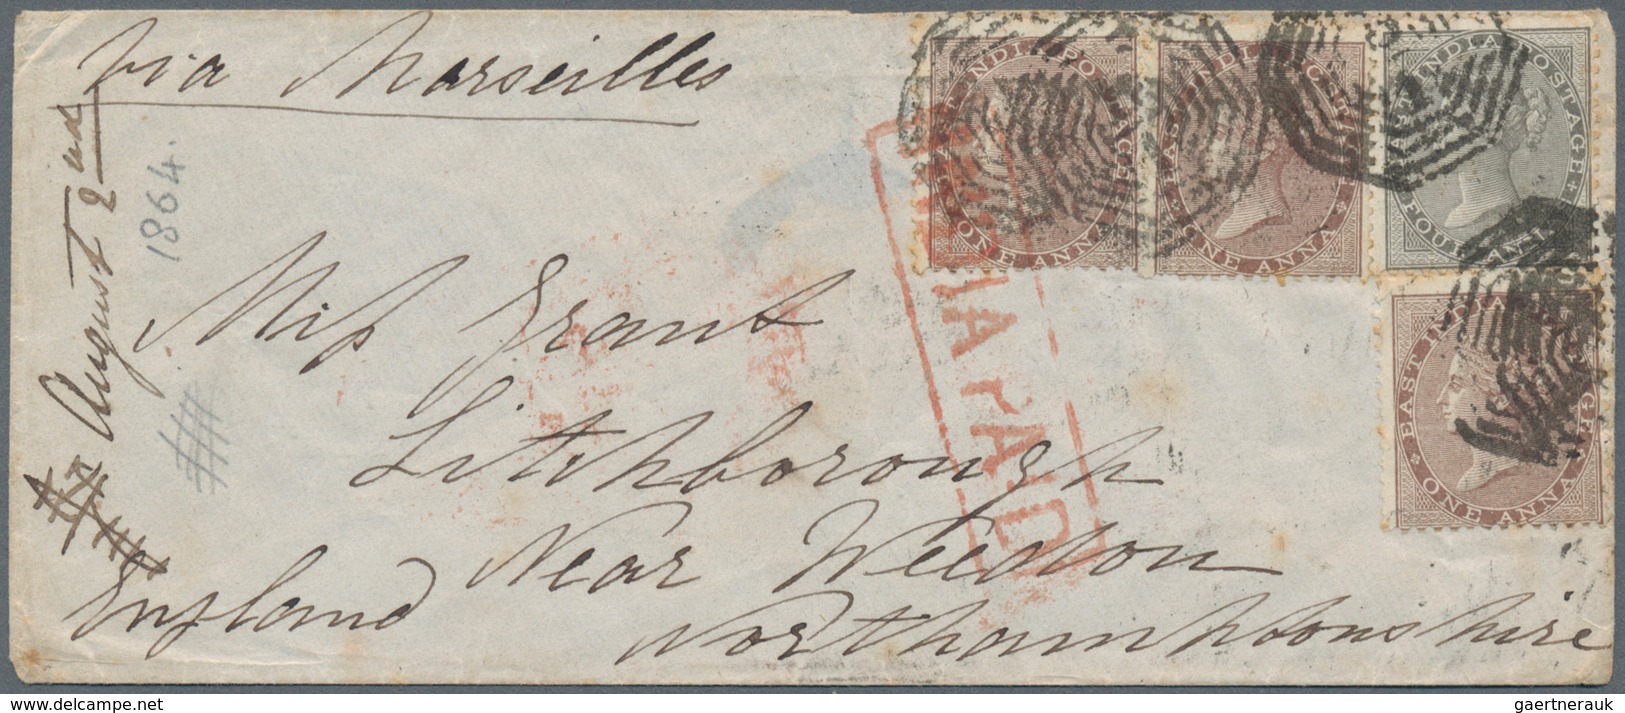 Indien: 1862/1872, five covers from a correspondence to Weedon, GB comprising two covers from AKYAB